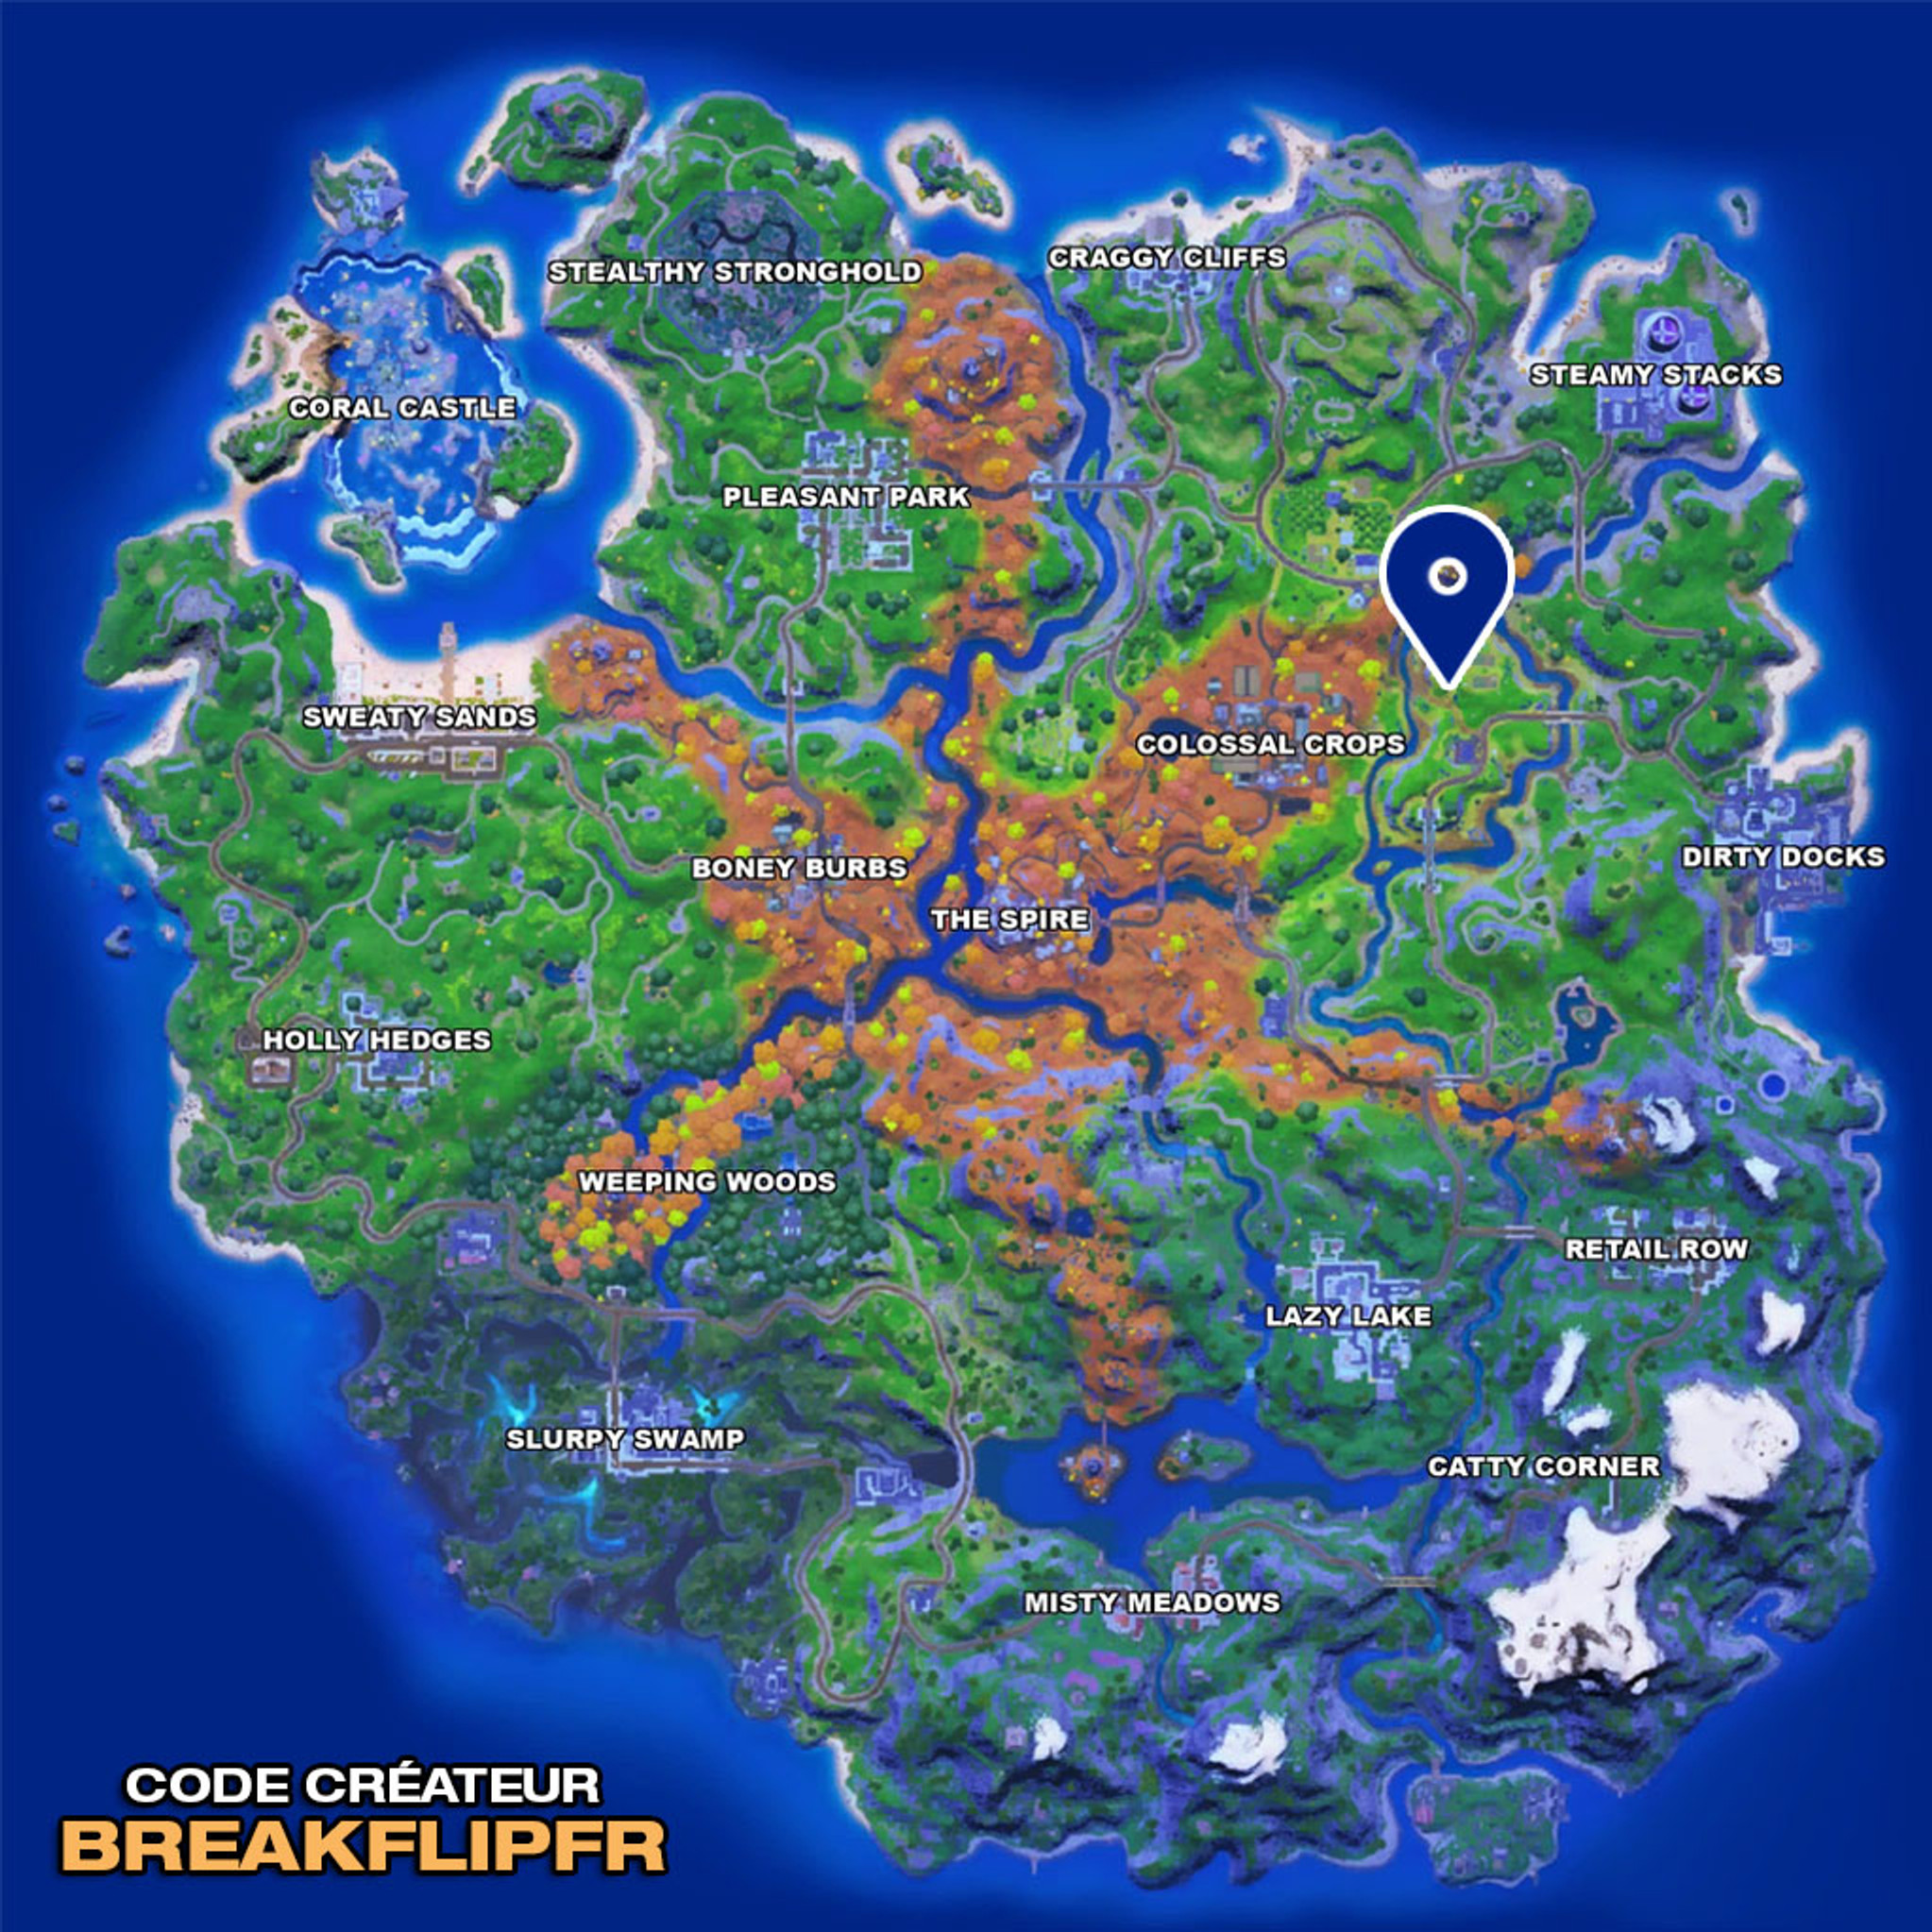 map-poulet-colossal-crops-defi-fortnite-ou